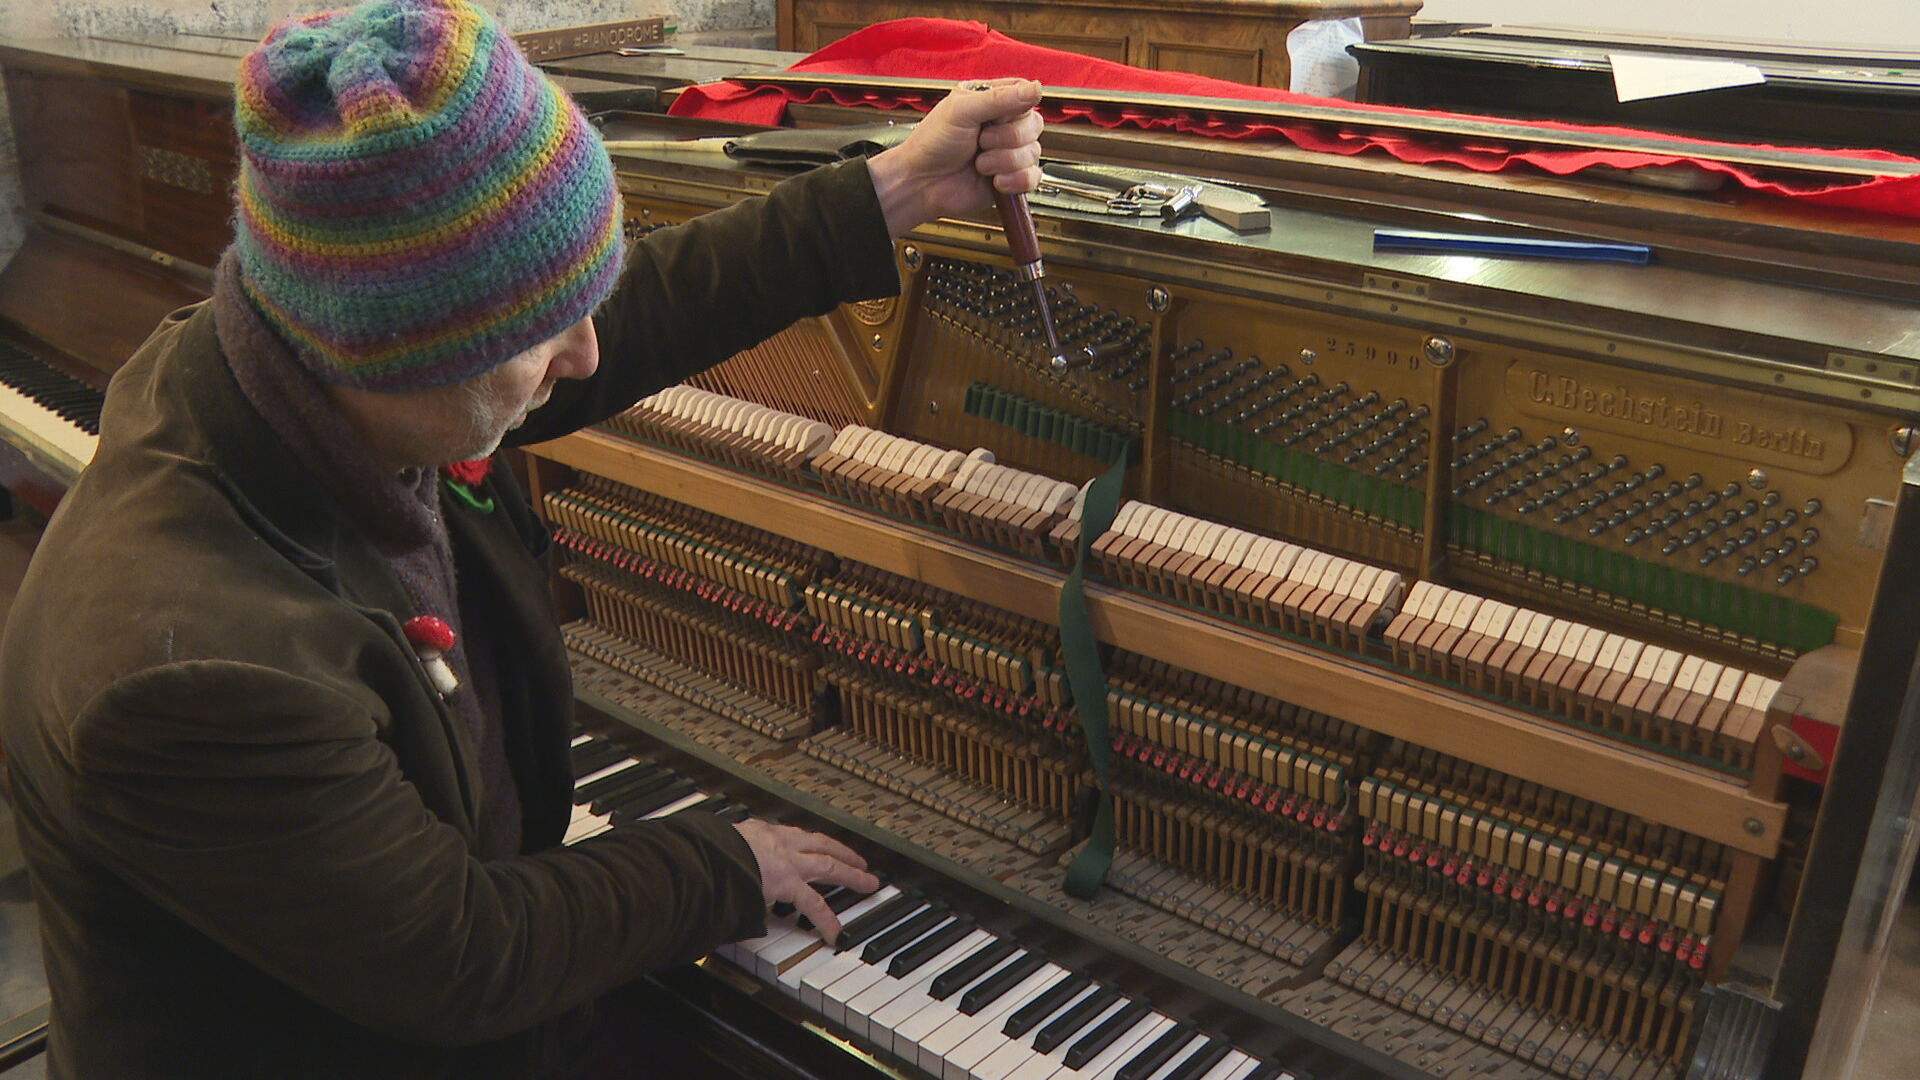 Joel Sanderson comes to the Pianodrome once a week to tune and repair the instruments. 